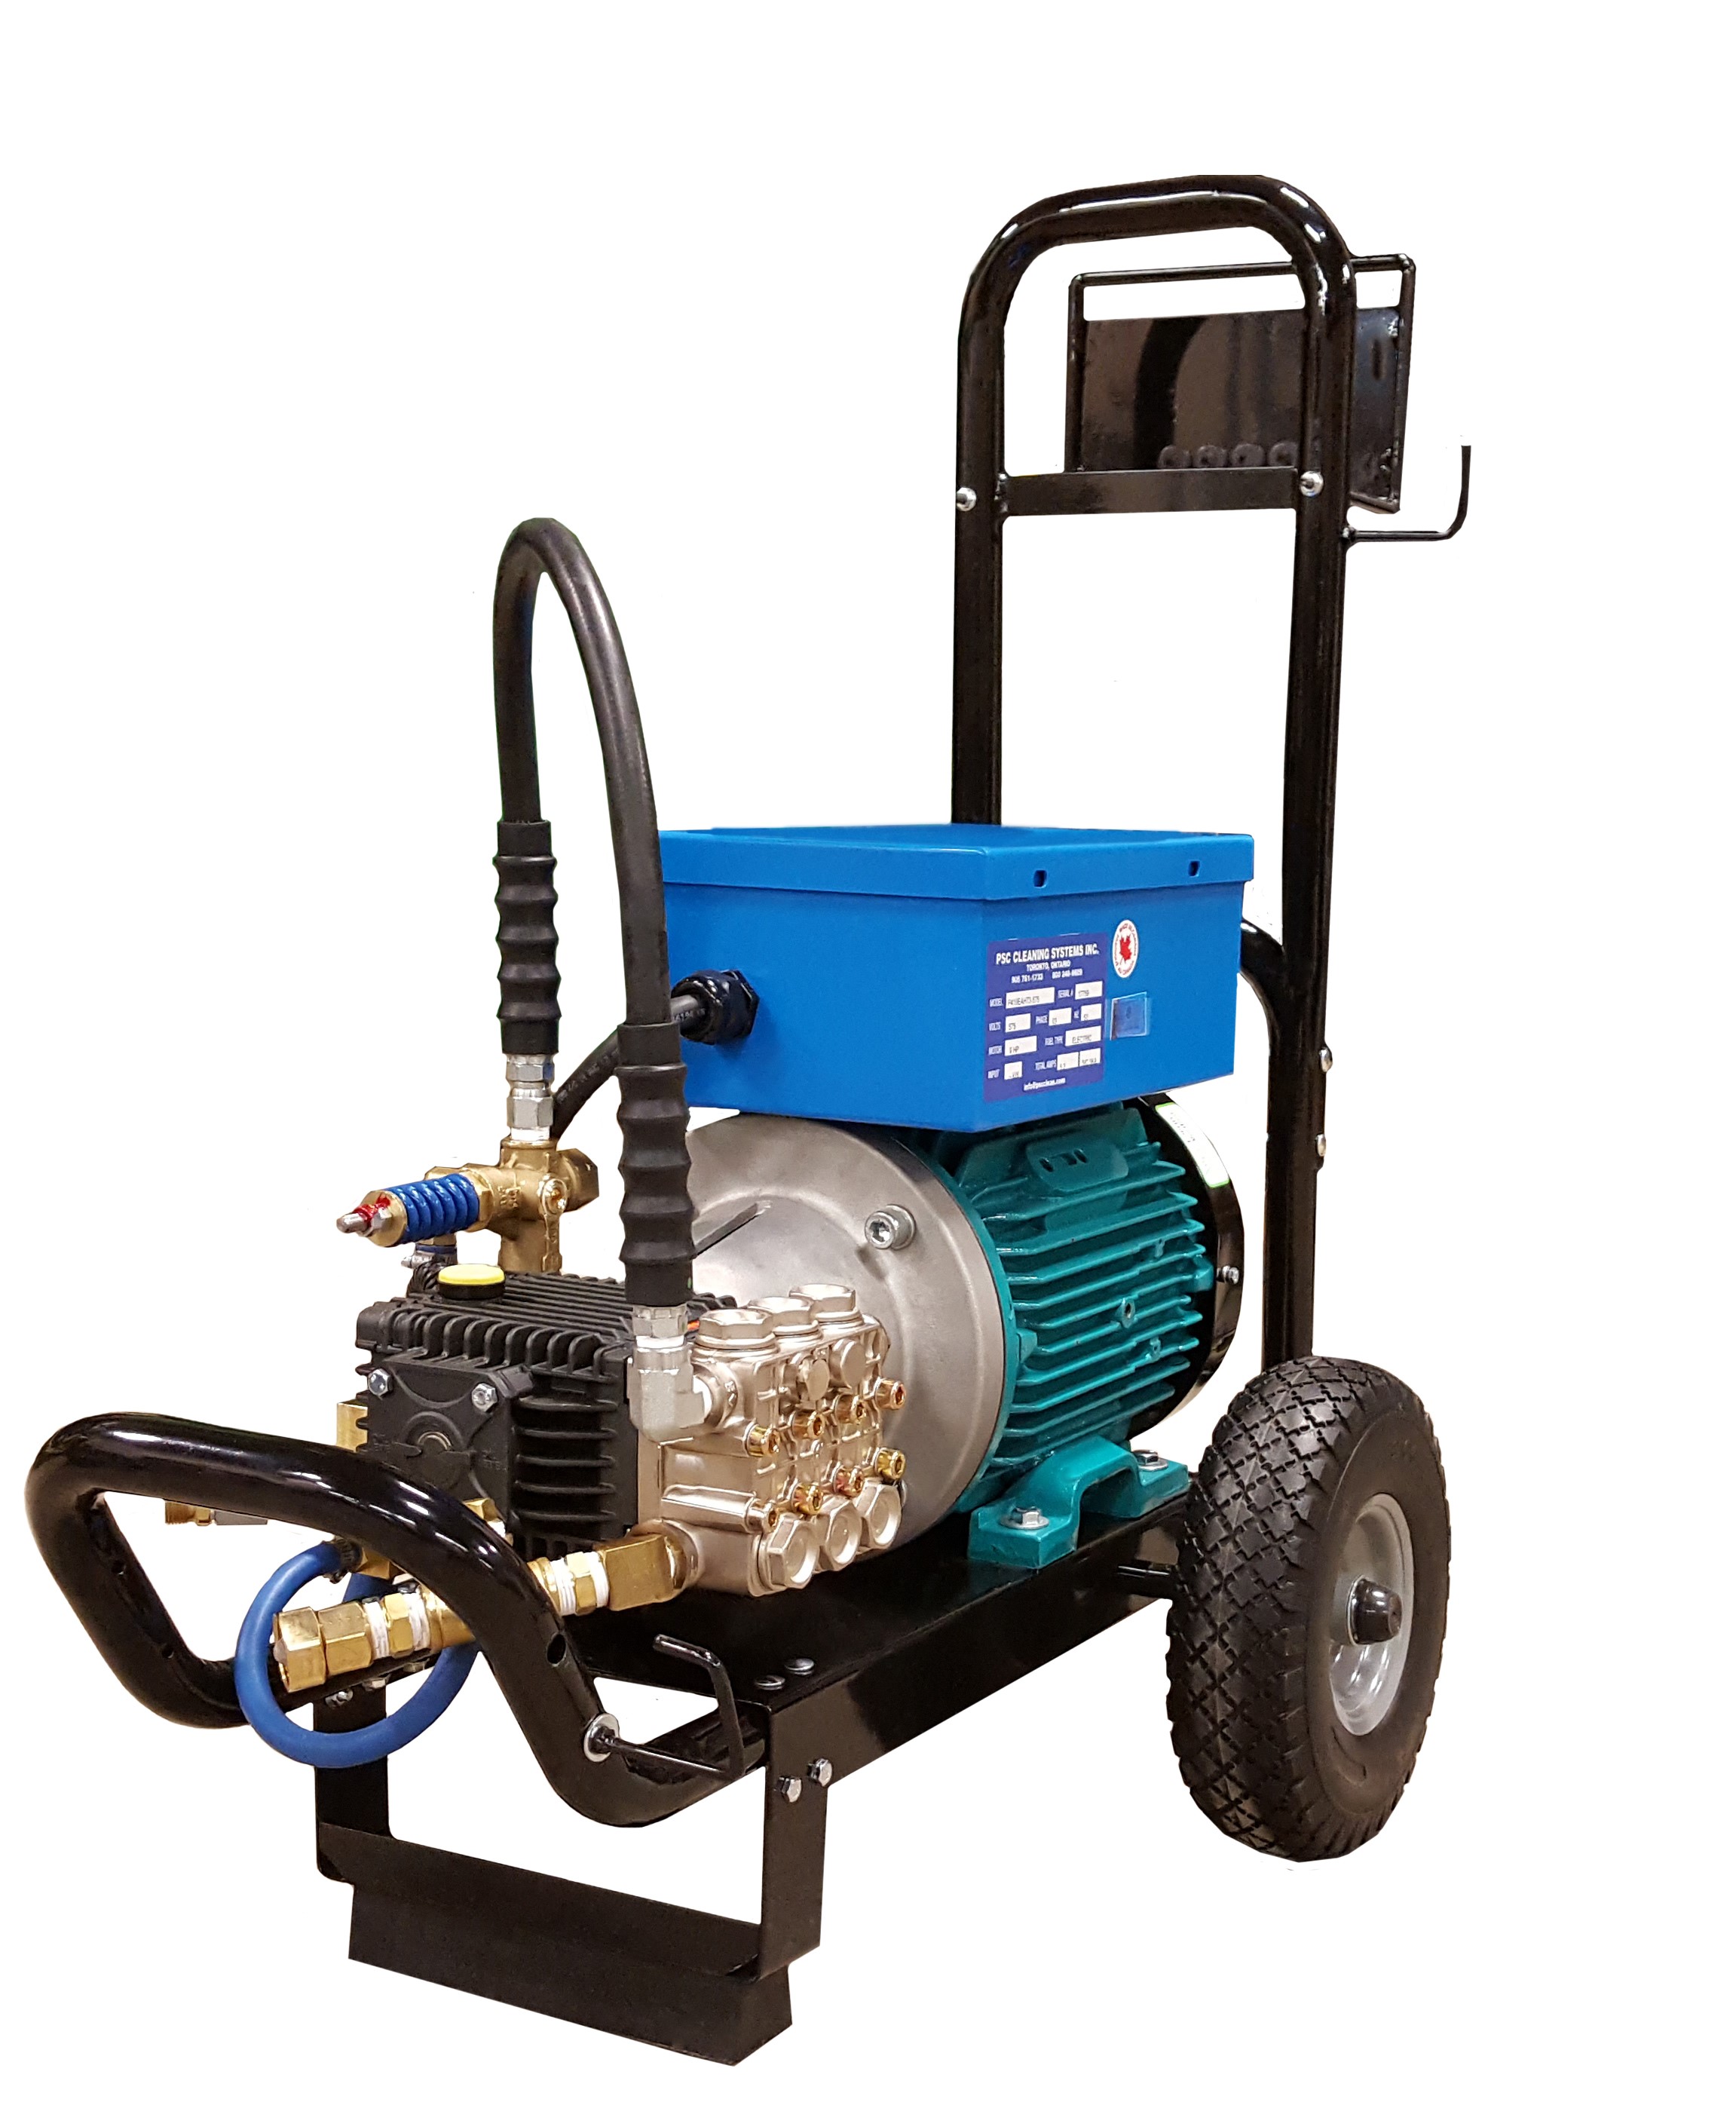 P419EAHT1-230 - Rated 3.96 Gpm @ 1800 Psi. 5 Hp, 230 Volt, 1 Phase TEFC Motor With IP55 Rating (approx. 22 Amps). CSA Approved.